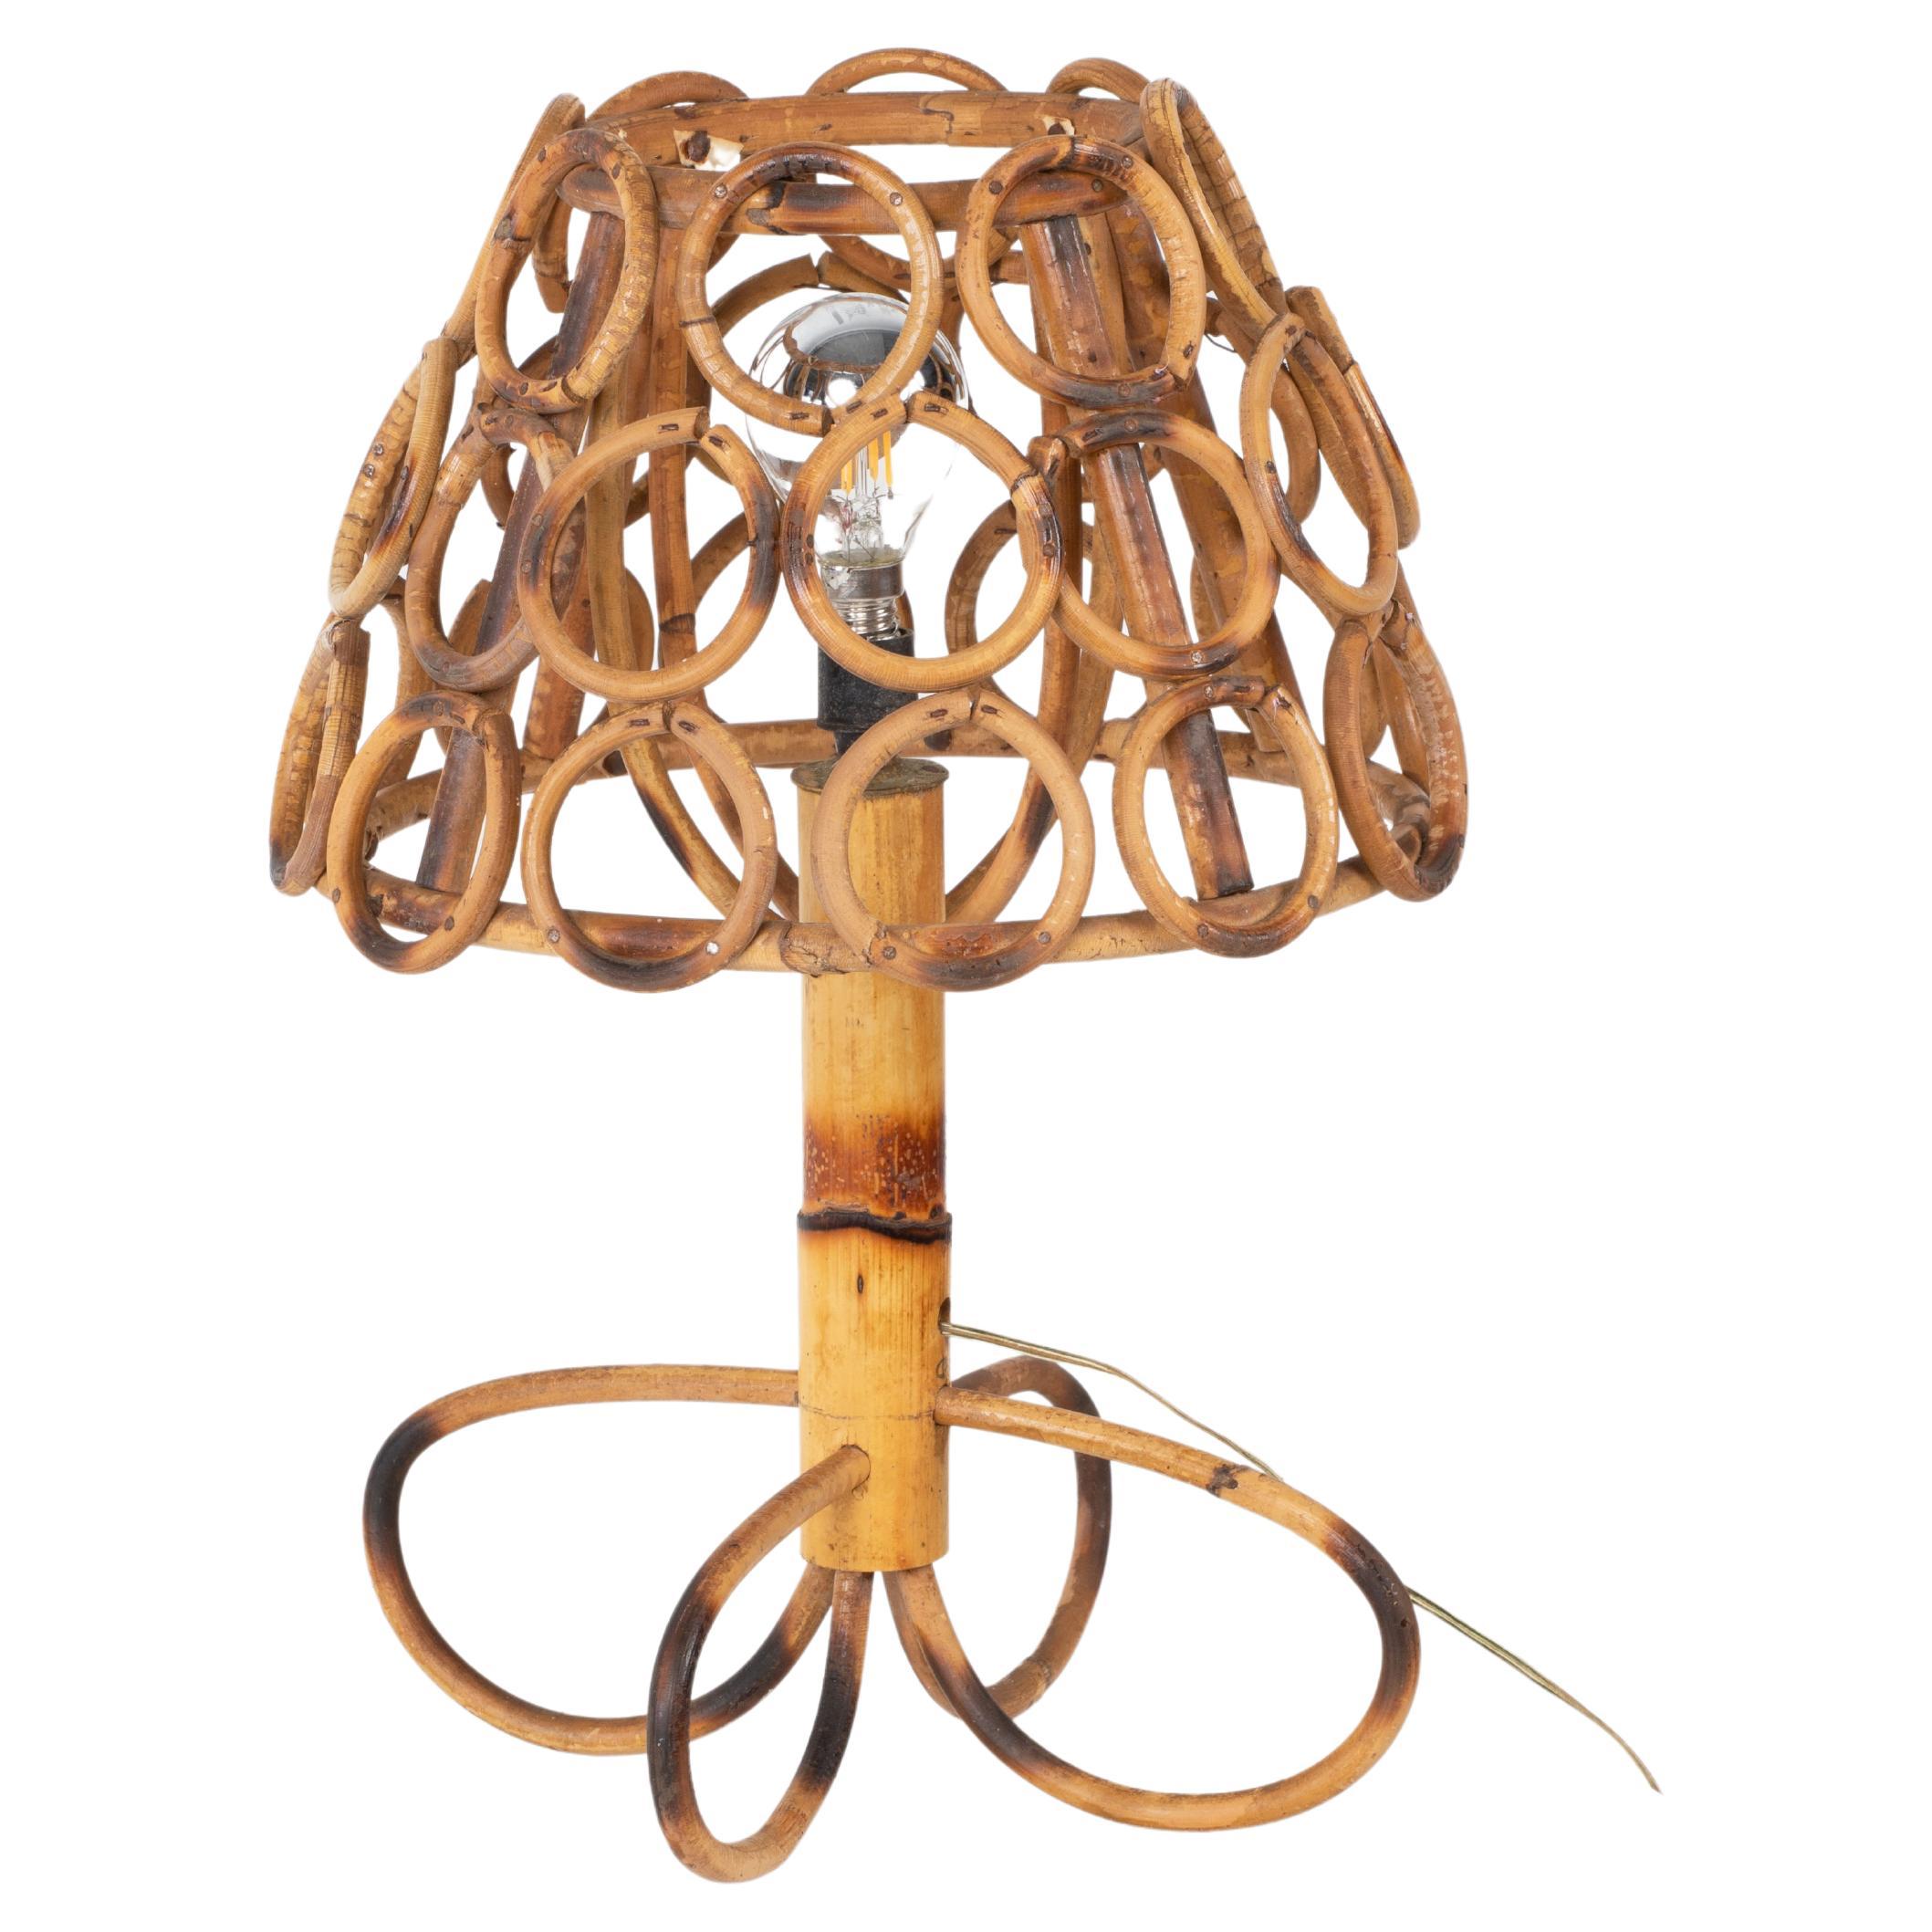 French mid-century Rattan lamp, Louis Sognot, France, 1960s.
Originality, soft and warm light, to be placed in any room of the house.
Good vintage condition.

